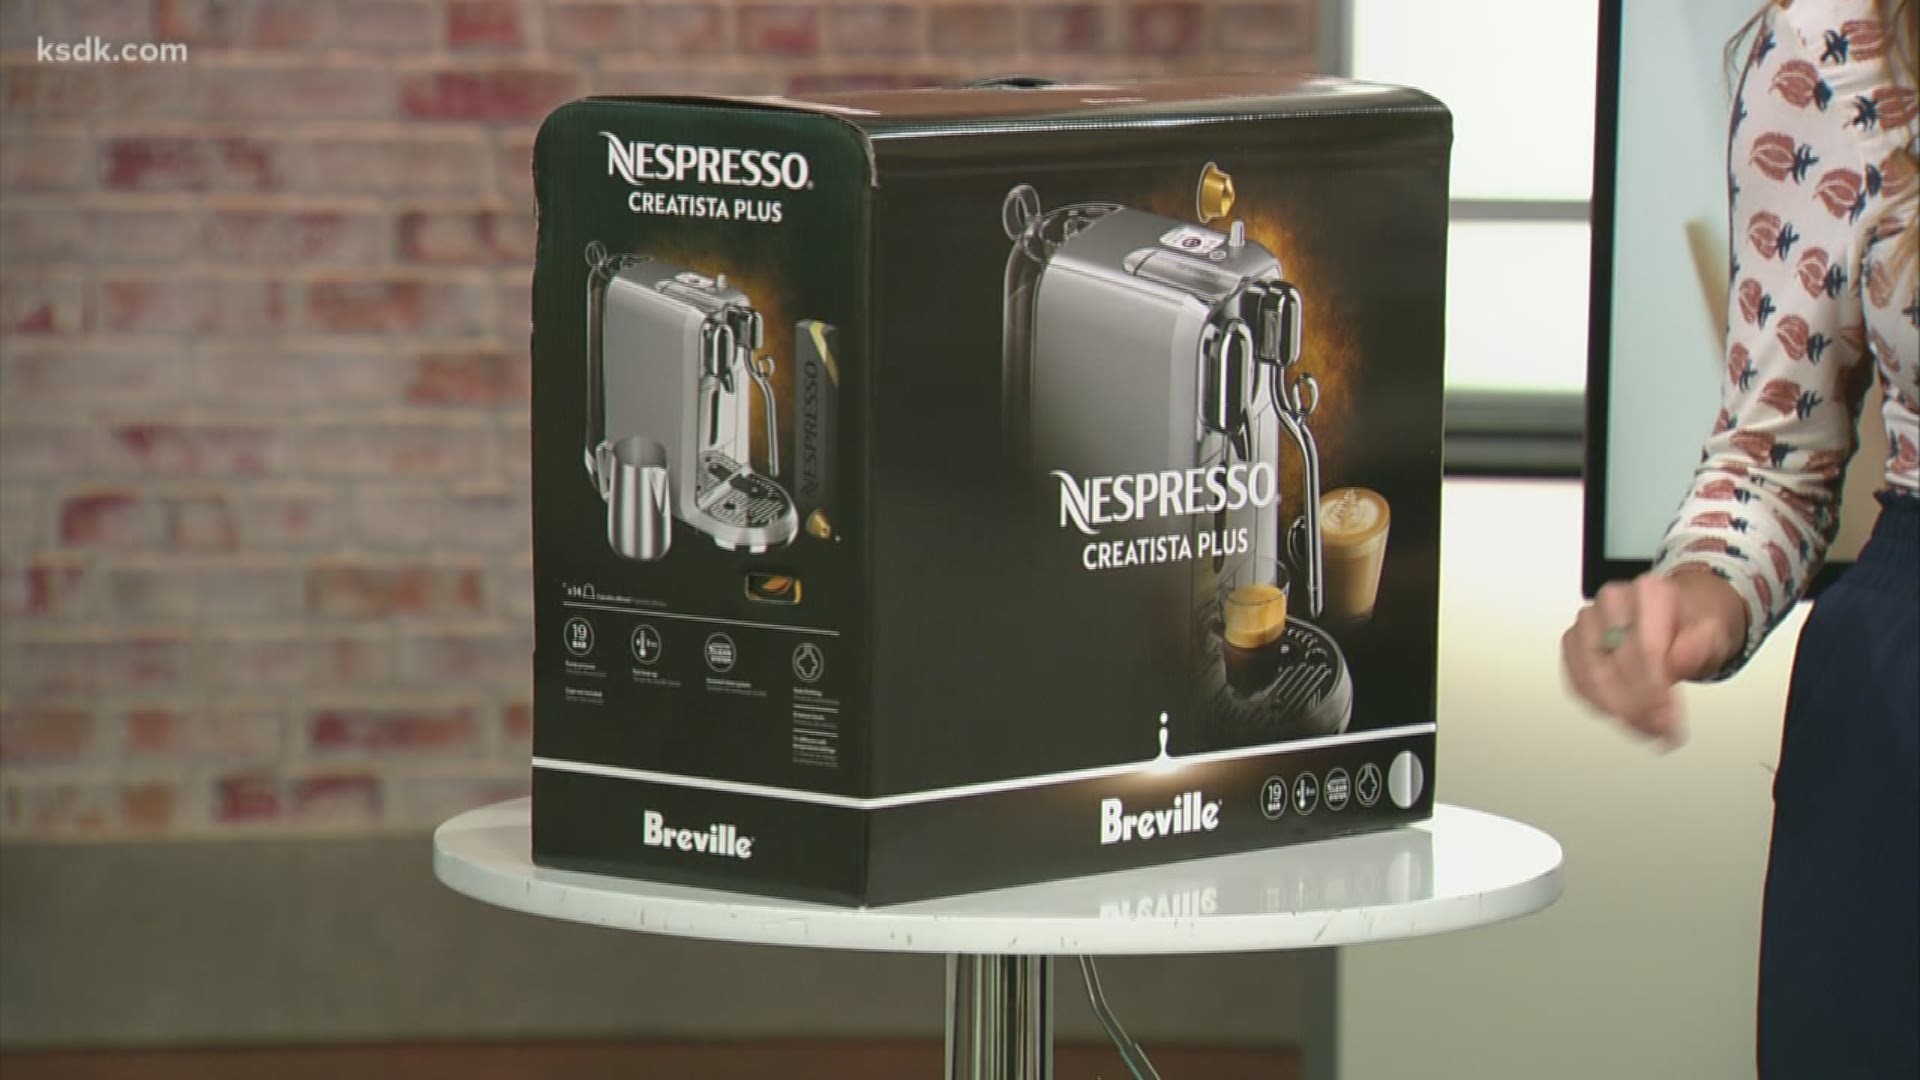 Get this Nespresso machine 20% off at Williams Sonoma with your Glennon Card.